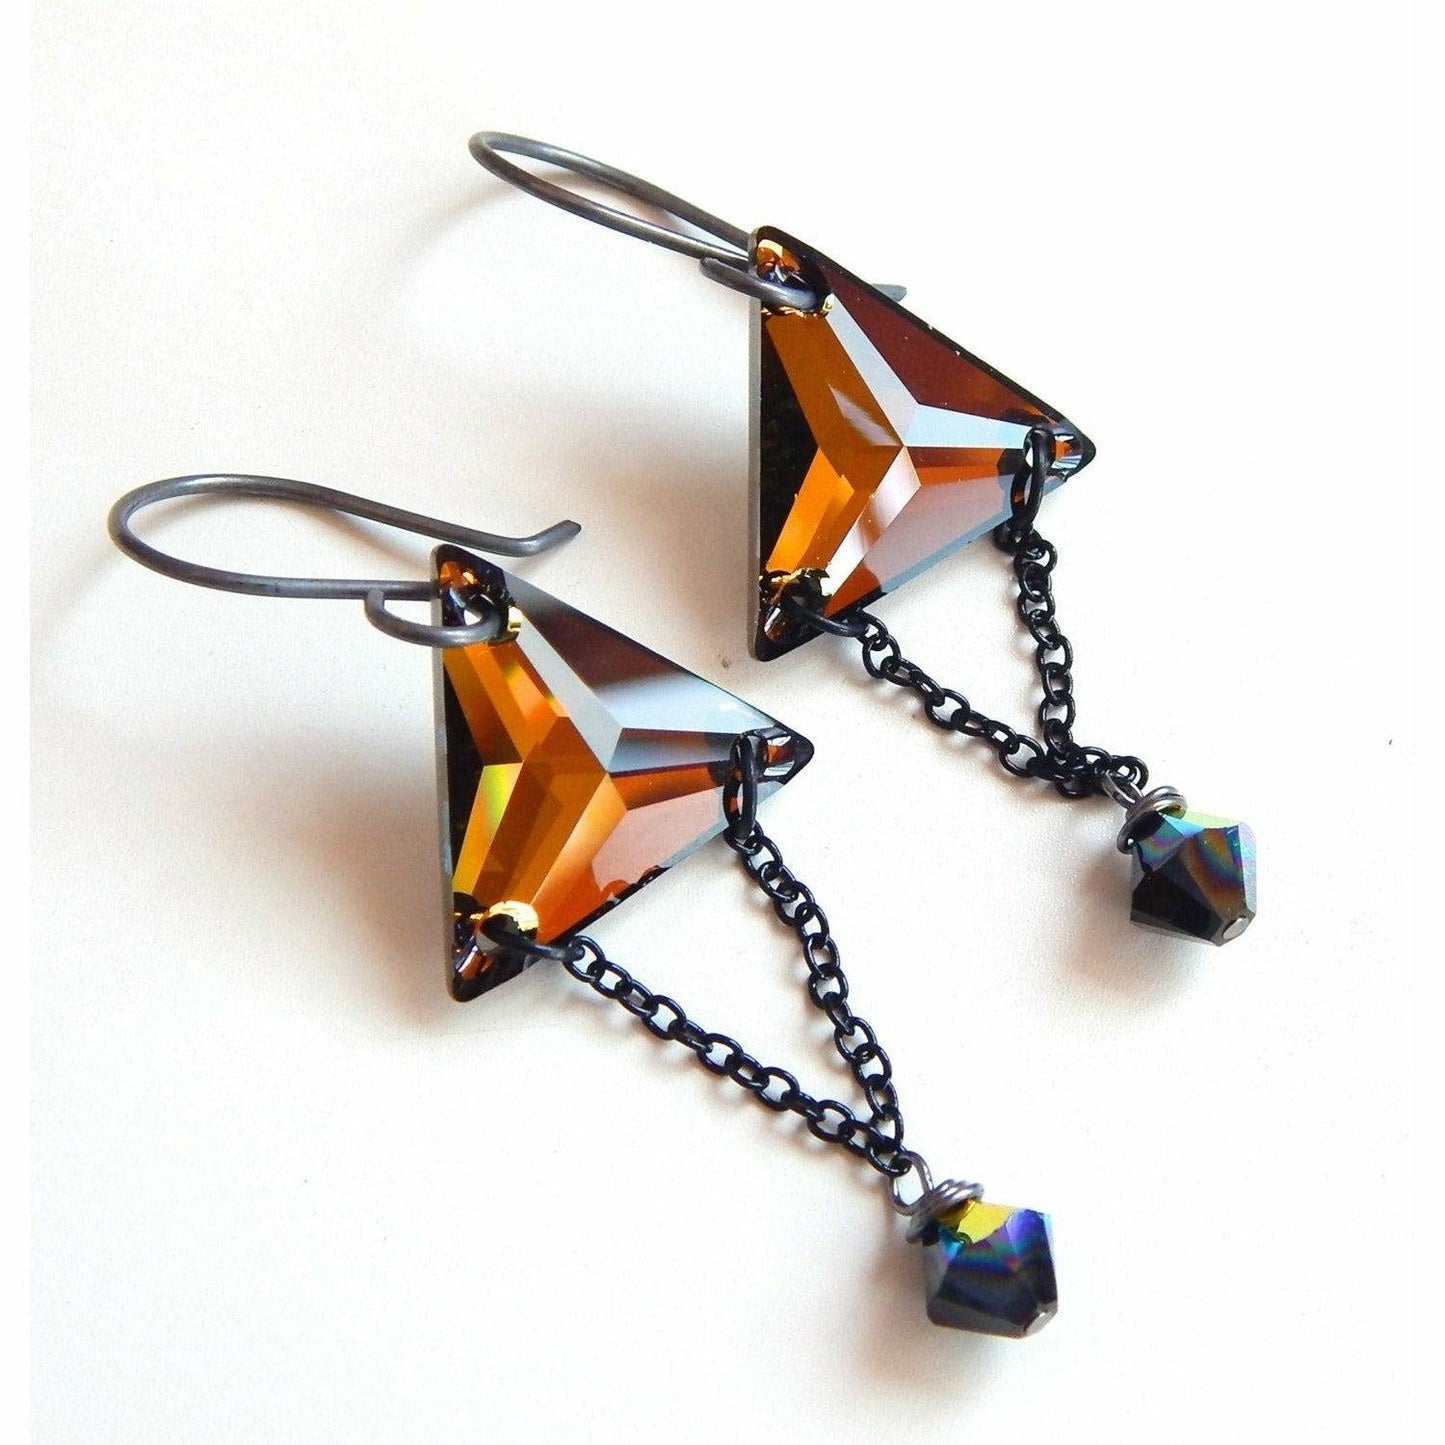 Triangle earrings as seen on The Vampire Diaries